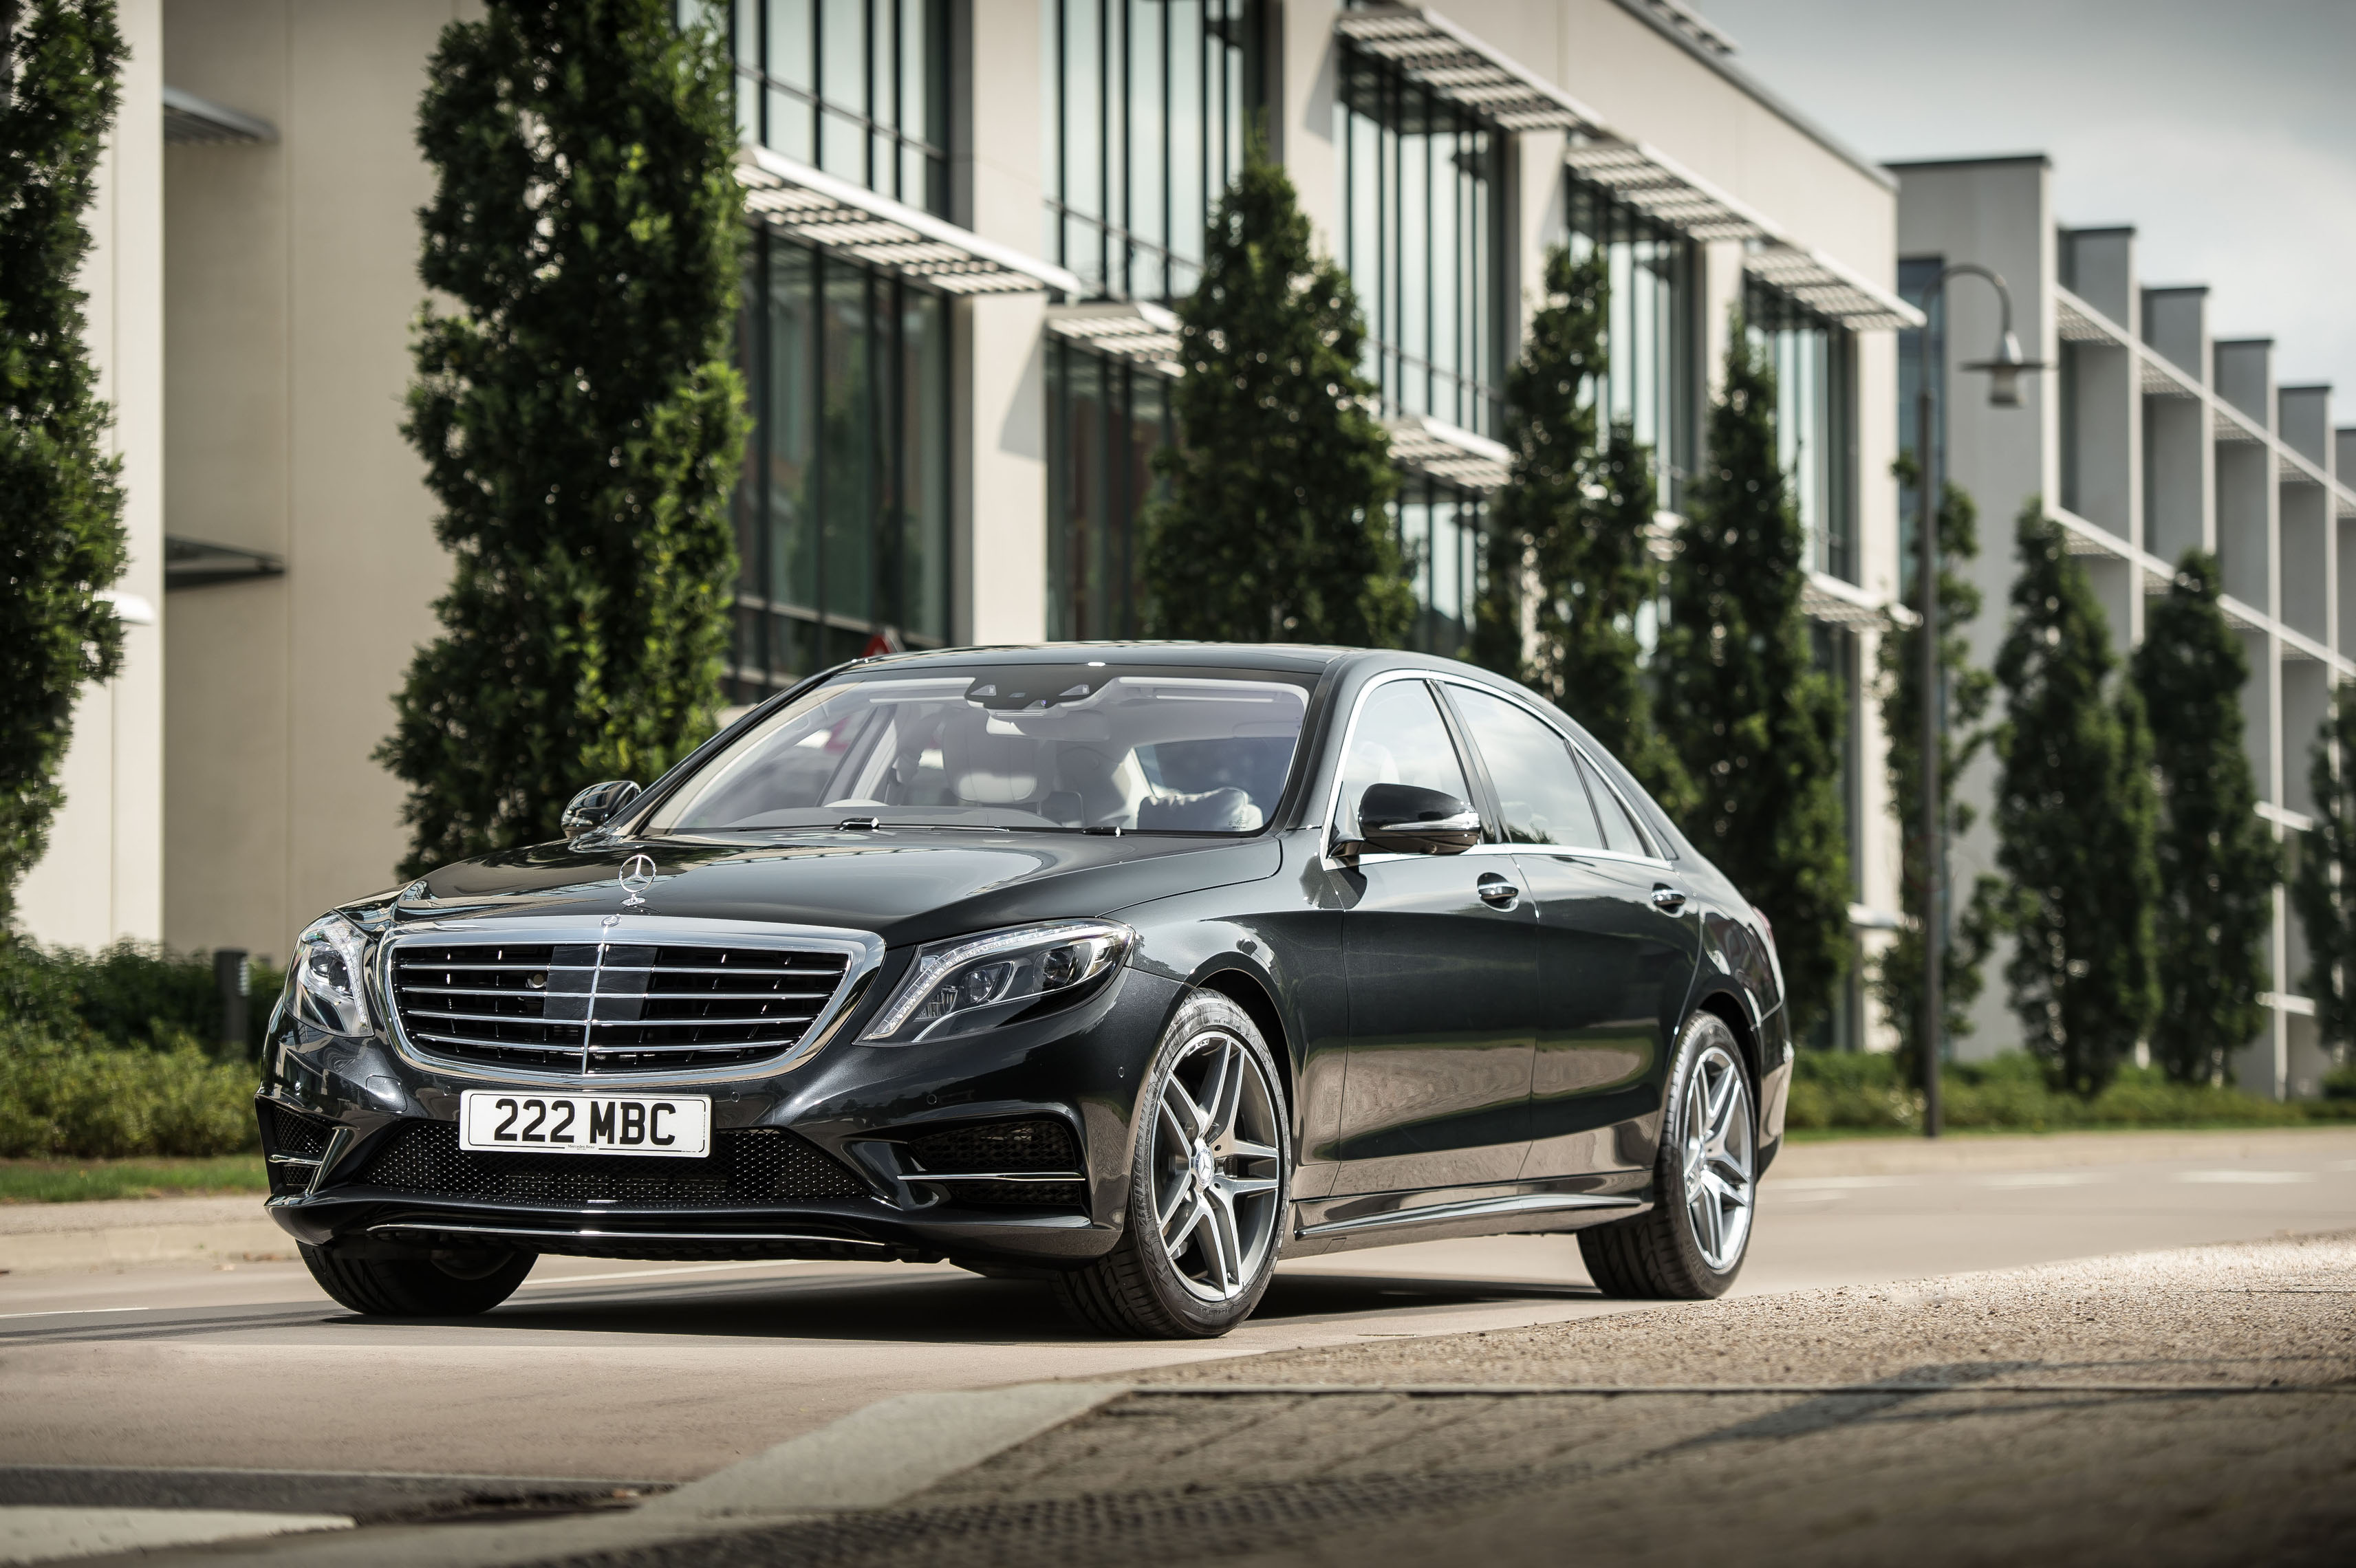 Mercedes has brought autonomous driving capabilities to the S Class